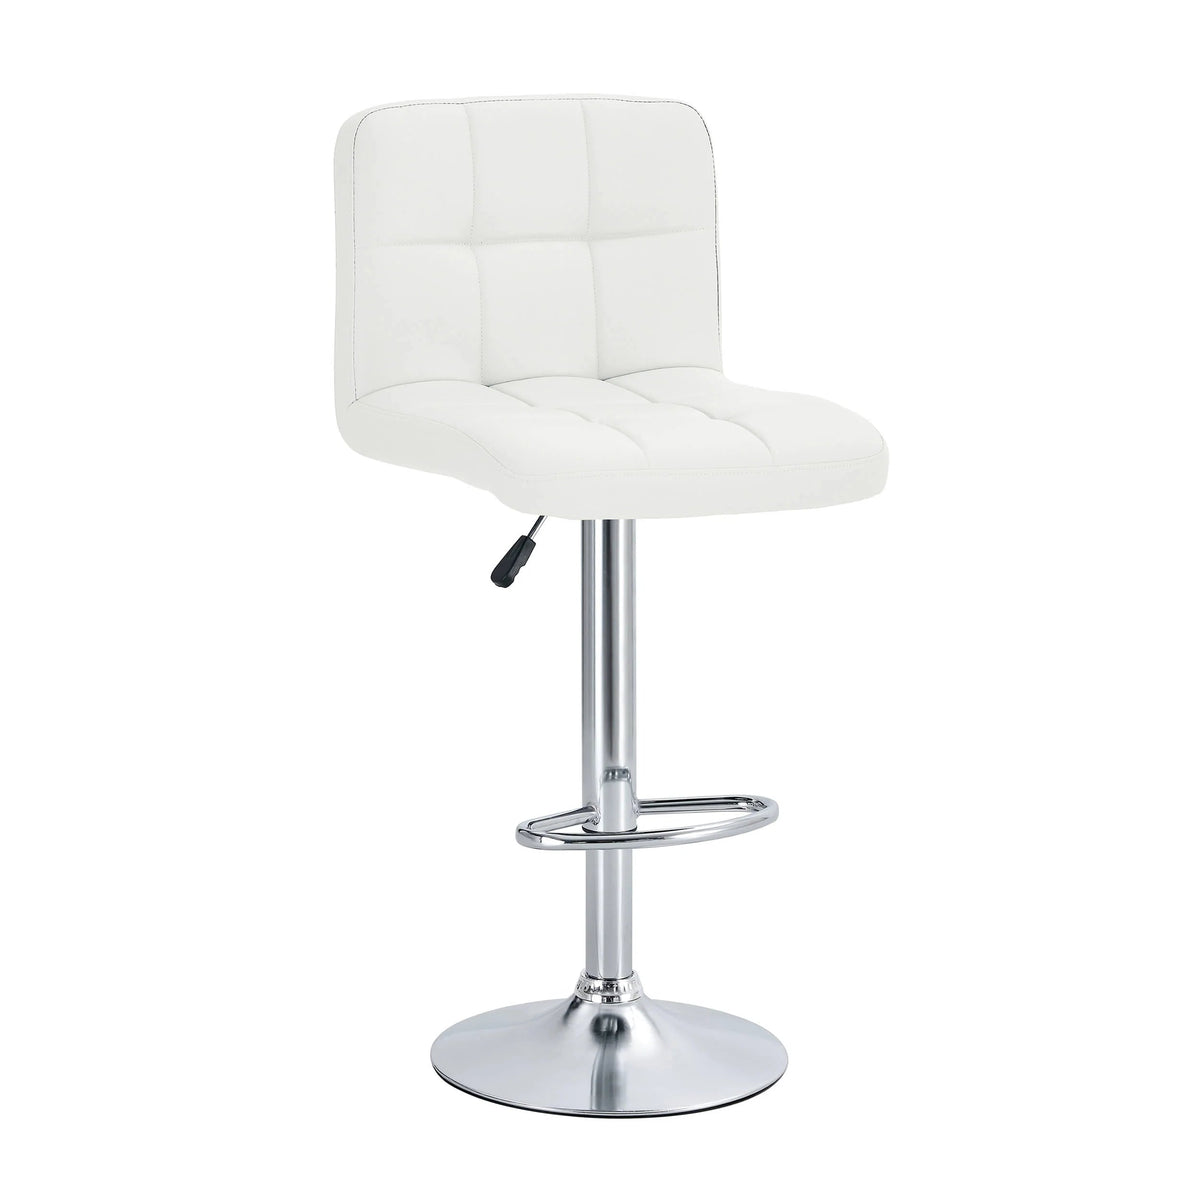 Finesse Decor Mirage Chrome Couture Counter Bar Stools White